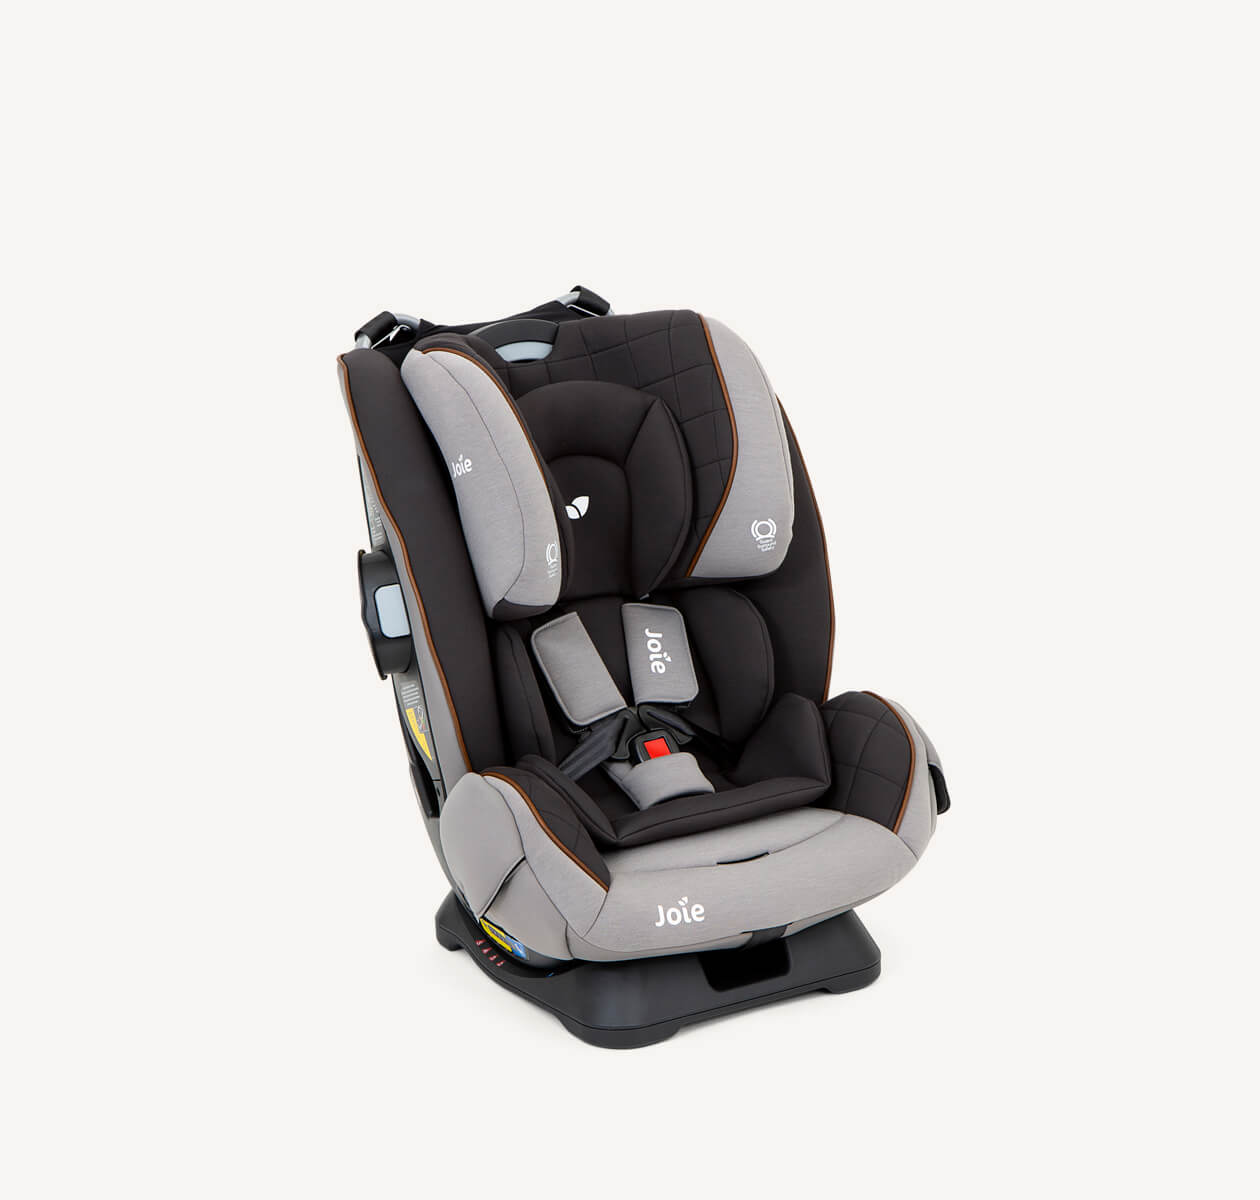 Joie Armour FX toddler car seat in dark gray from a right angle.